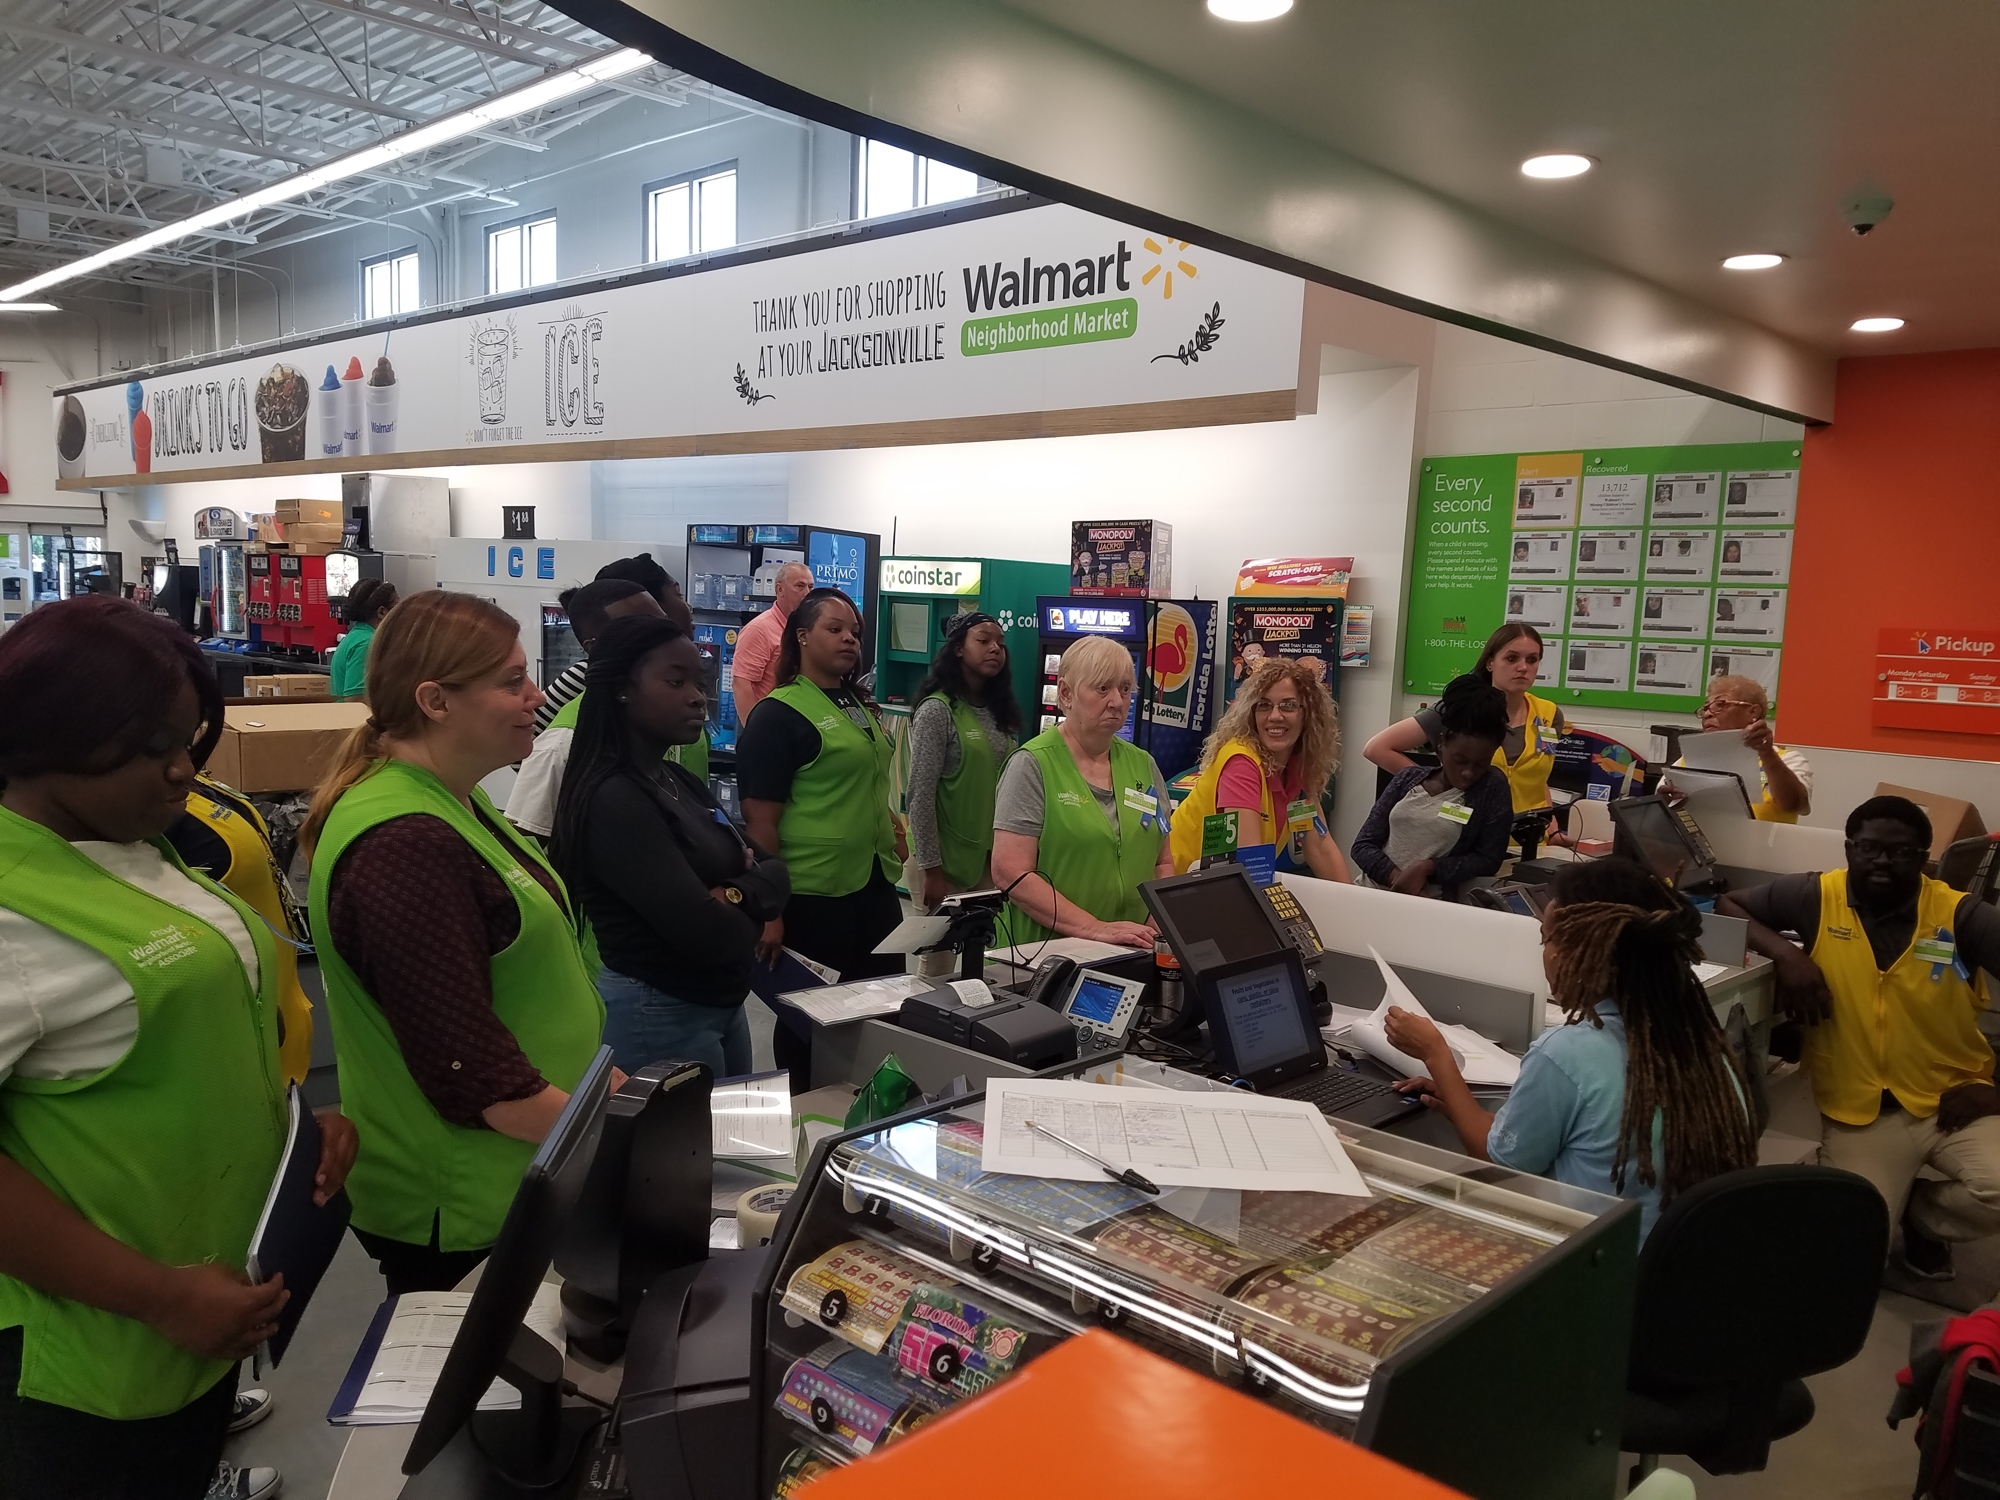 Workers hired at the Walmart Neighborhood Market on Baymeadows Road gather around the front desk for directions from managers in preparation of the store's opening Wednesday.